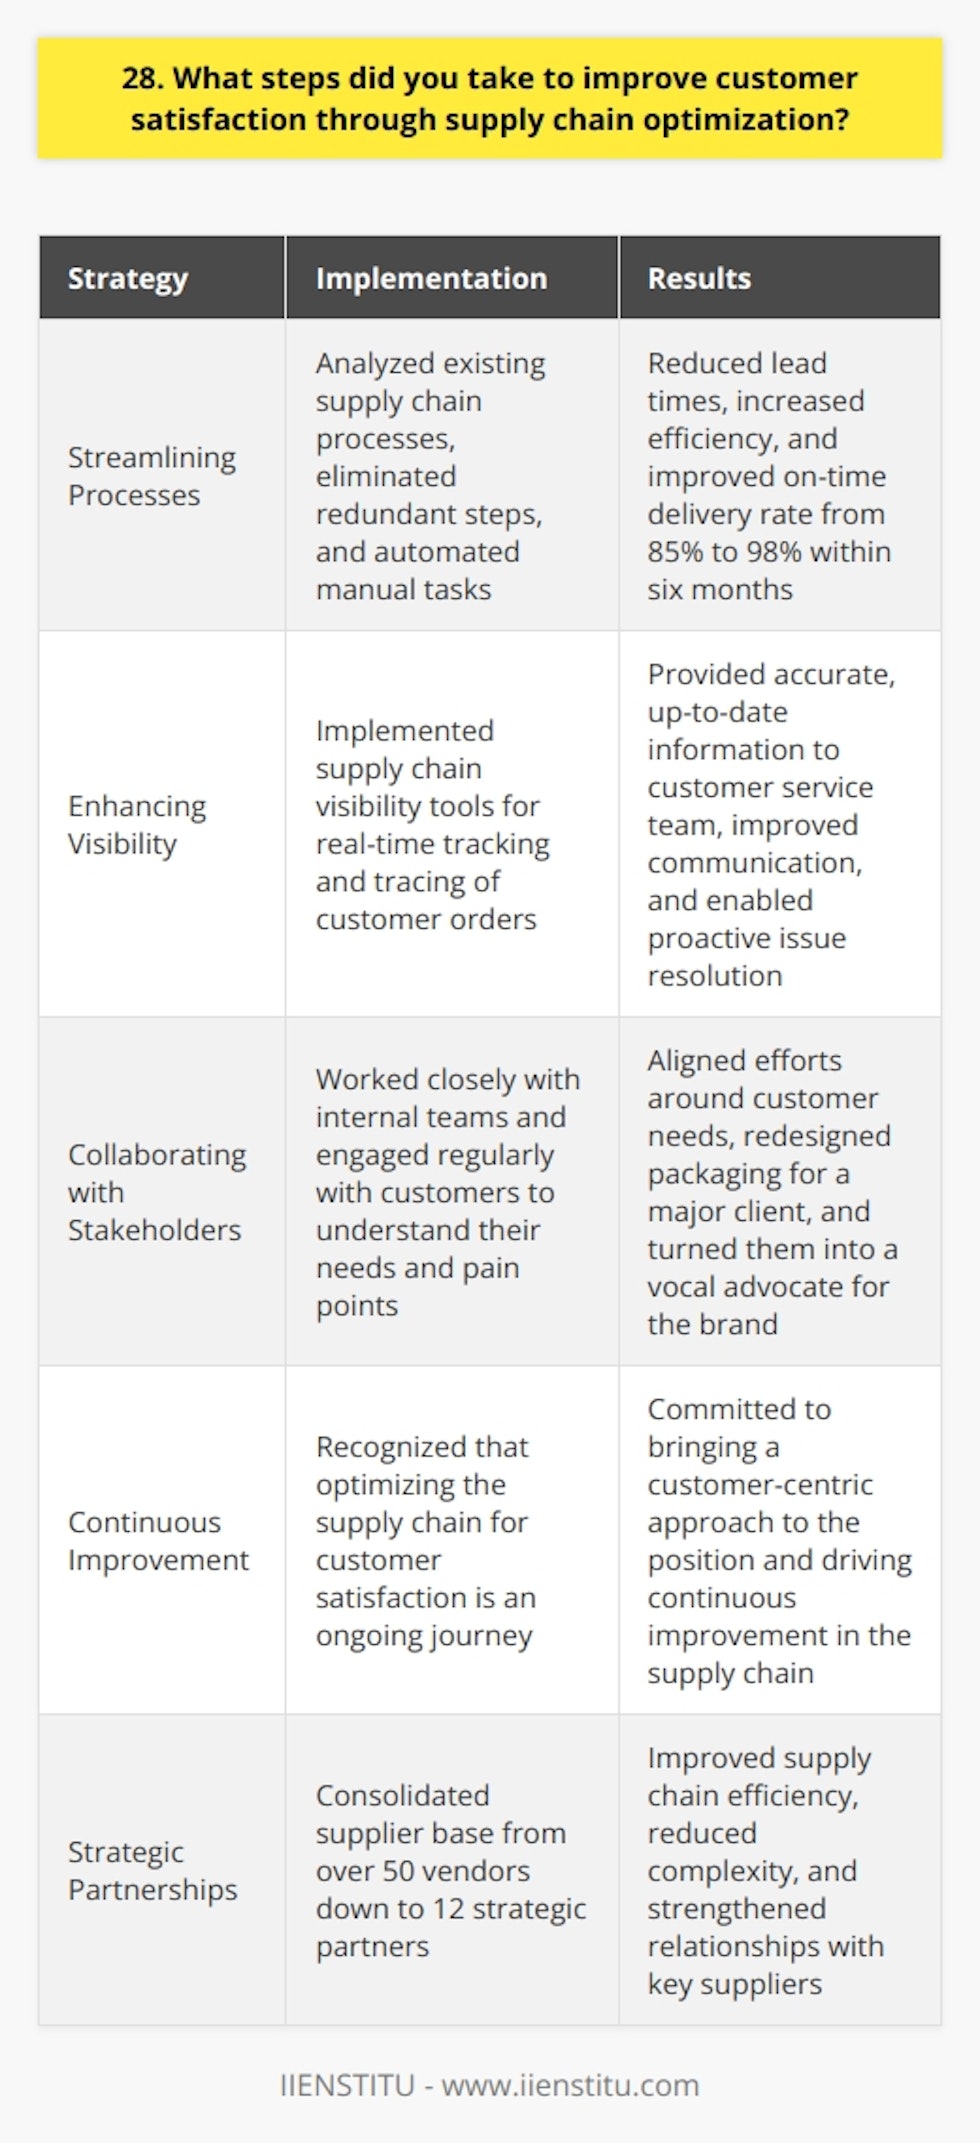 As a supply chain manager, Ive implemented several strategies to enhance customer satisfaction through supply chain optimization: Streamlining Processes I analyzed our existing supply chain processes and identified areas for improvement. By eliminating redundant steps and automating manual tasks, we reduced lead times and increased efficiency. This allowed us to fulfill customer orders more quickly and reliably. For example, I remember one project where we consolidated our supplier base from over 50 vendors down to just 12 strategic partners. It was a challenging undertaking, but the results were worth it - our on-time delivery rate jumped from 85% to 98% within six months. Our customers definitely noticed and appreciated the faster, more consistent service. Enhancing Visibility I implemented supply chain visibility tools that provided real-time tracking and tracing of customer orders. This gave our customer service team accurate, up-to-date information to share with customers, improving communication and building trust. These tools also helped us be more proactive. Instead of waiting for customers to contact us about delayed shipments, we could spot potential issues early and take corrective action. In my opinion, this was a game-changer for customer satisfaction. Collaborating with Stakeholders I believe strong relationships are key to supply chain success. I worked closely with internal teams like sales and manufacturing to align our efforts around customer needs. I also engaged regularly with customers to understand their pain points and get feedback on our performance. One of my proudest moments was working with a major client to redesign our packaging to better suit their needs. By listening to their concerns and collaborating on a solution, we not only kept their business but turned them into a vocal advocate for our brand. In the end, optimizing the supply chain for customer satisfaction is an ongoing journey that requires continuous improvement. But by streamlining processes, improving visibility, and collaborating with stakeholders, Ive been able to make a real impact in my roles. Im excited to bring that same customer-centric approach to this position.